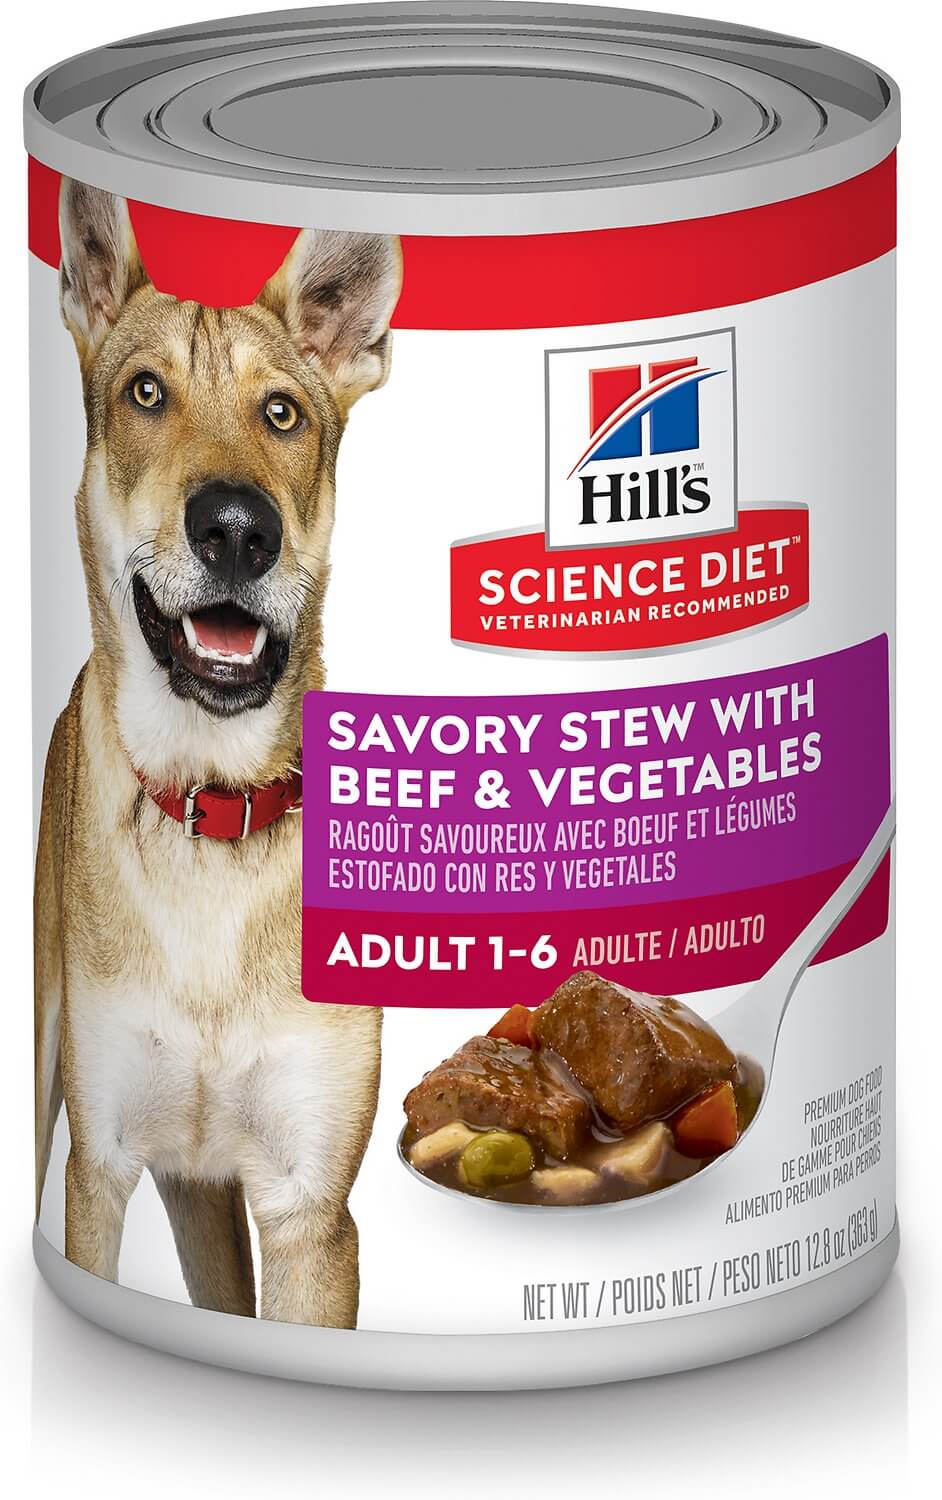 Hill’s Science Diet Adult Dog Food Review (Canned)